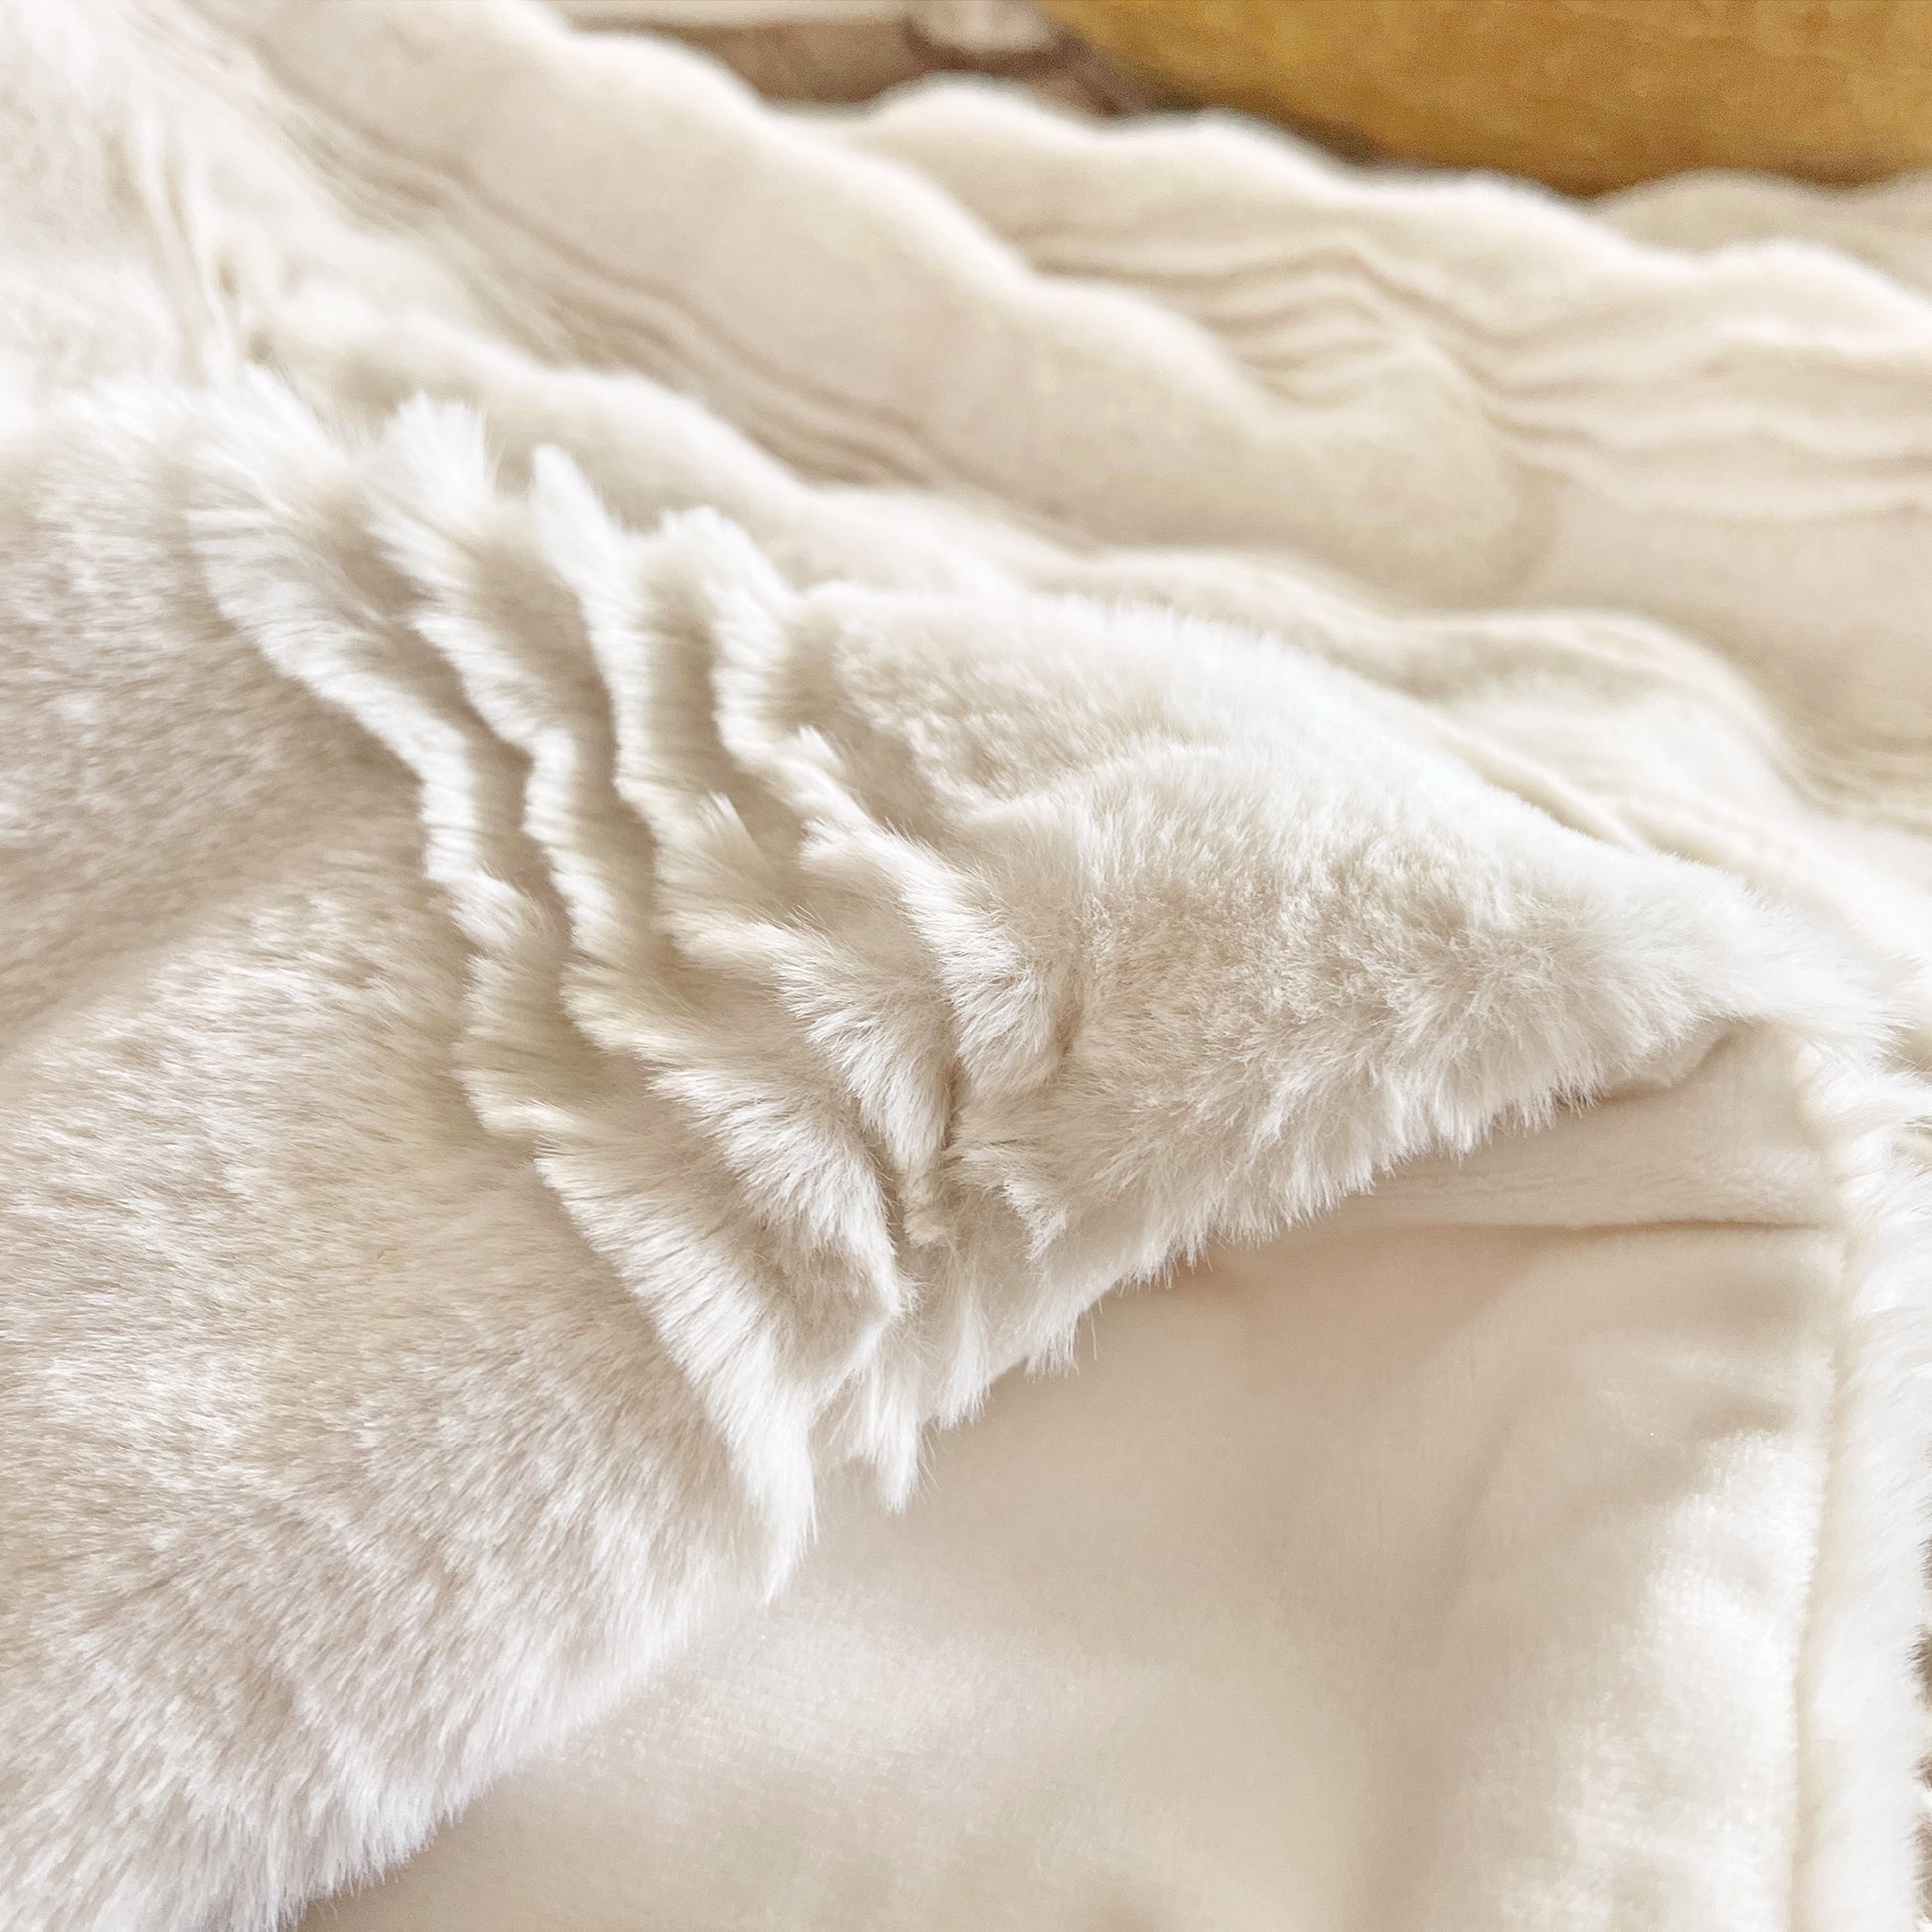 The Mood Scallop Faux Fur Throw, 50x60 in., Coconut (Beige)